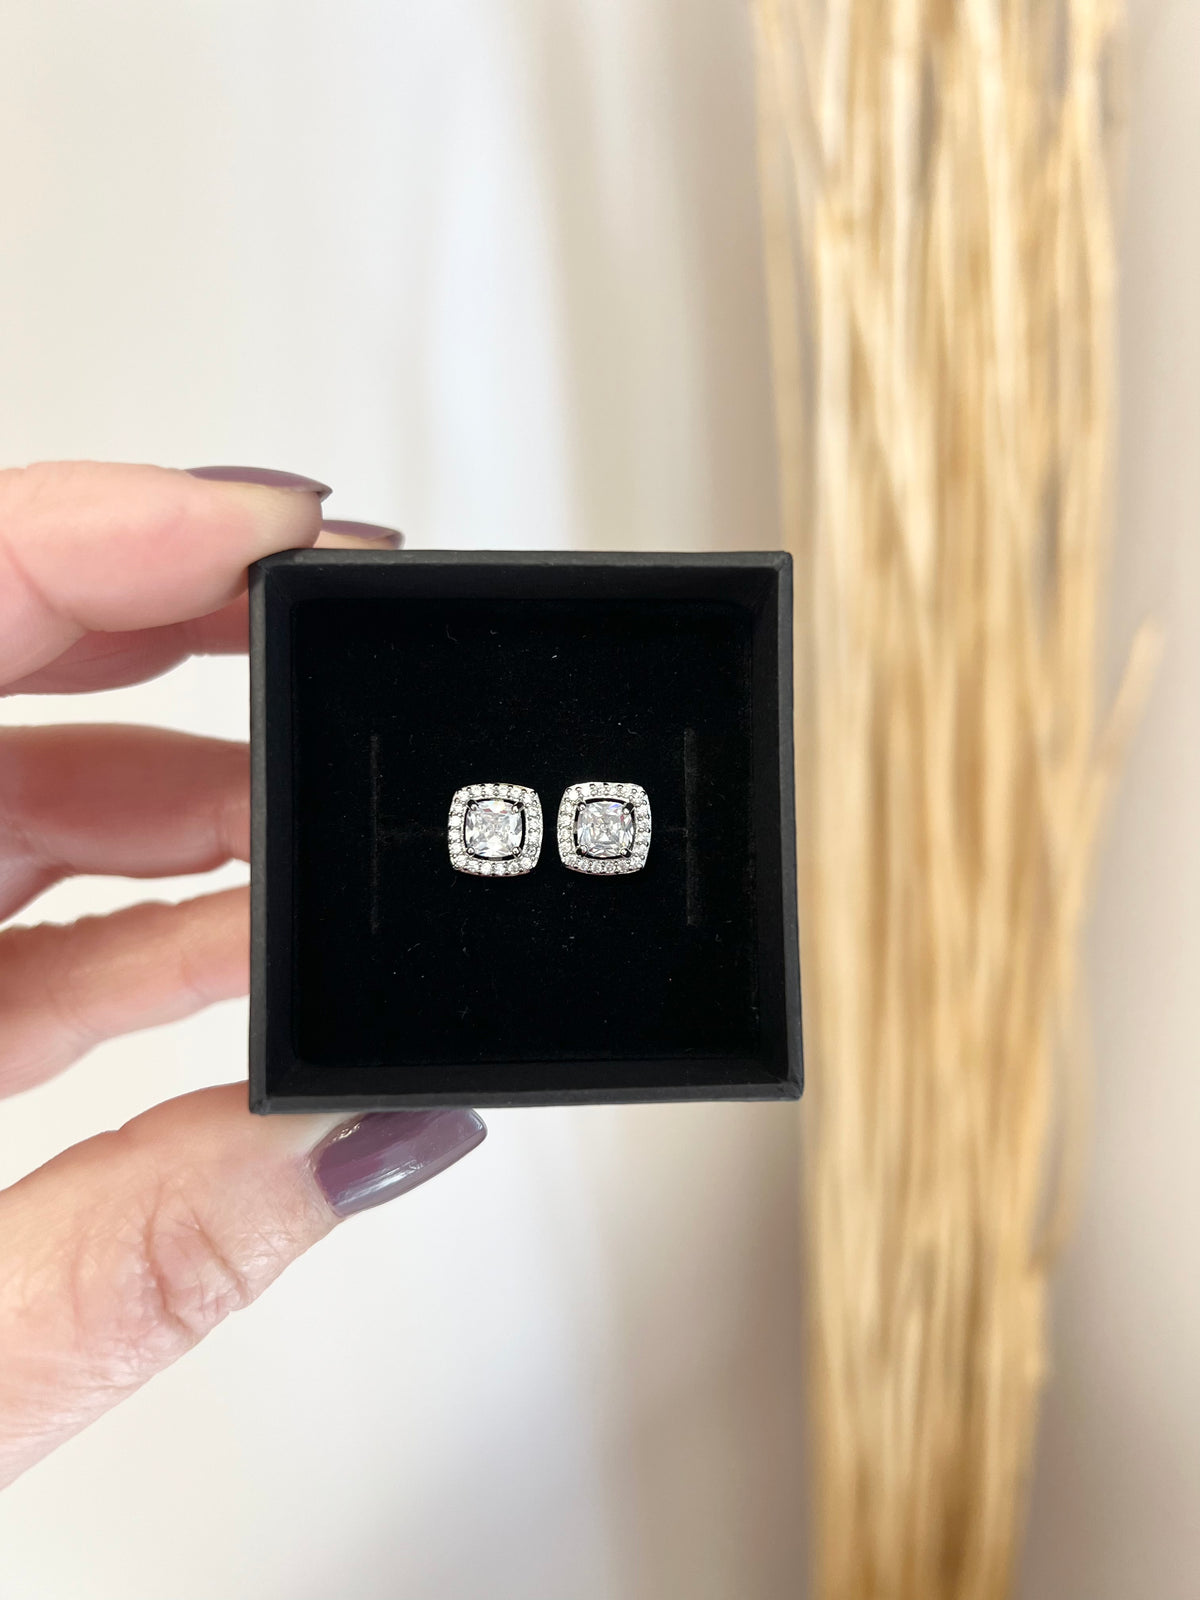 Moissanite Stud Earrings | Round or Square Cushion Halo Setting | Material: 925 sterling silver rhodium-plated | Length: 1.25" | Solitaire: 2 carat (1 carat per earring) | Weight: 0.2 oz (6 g) for set